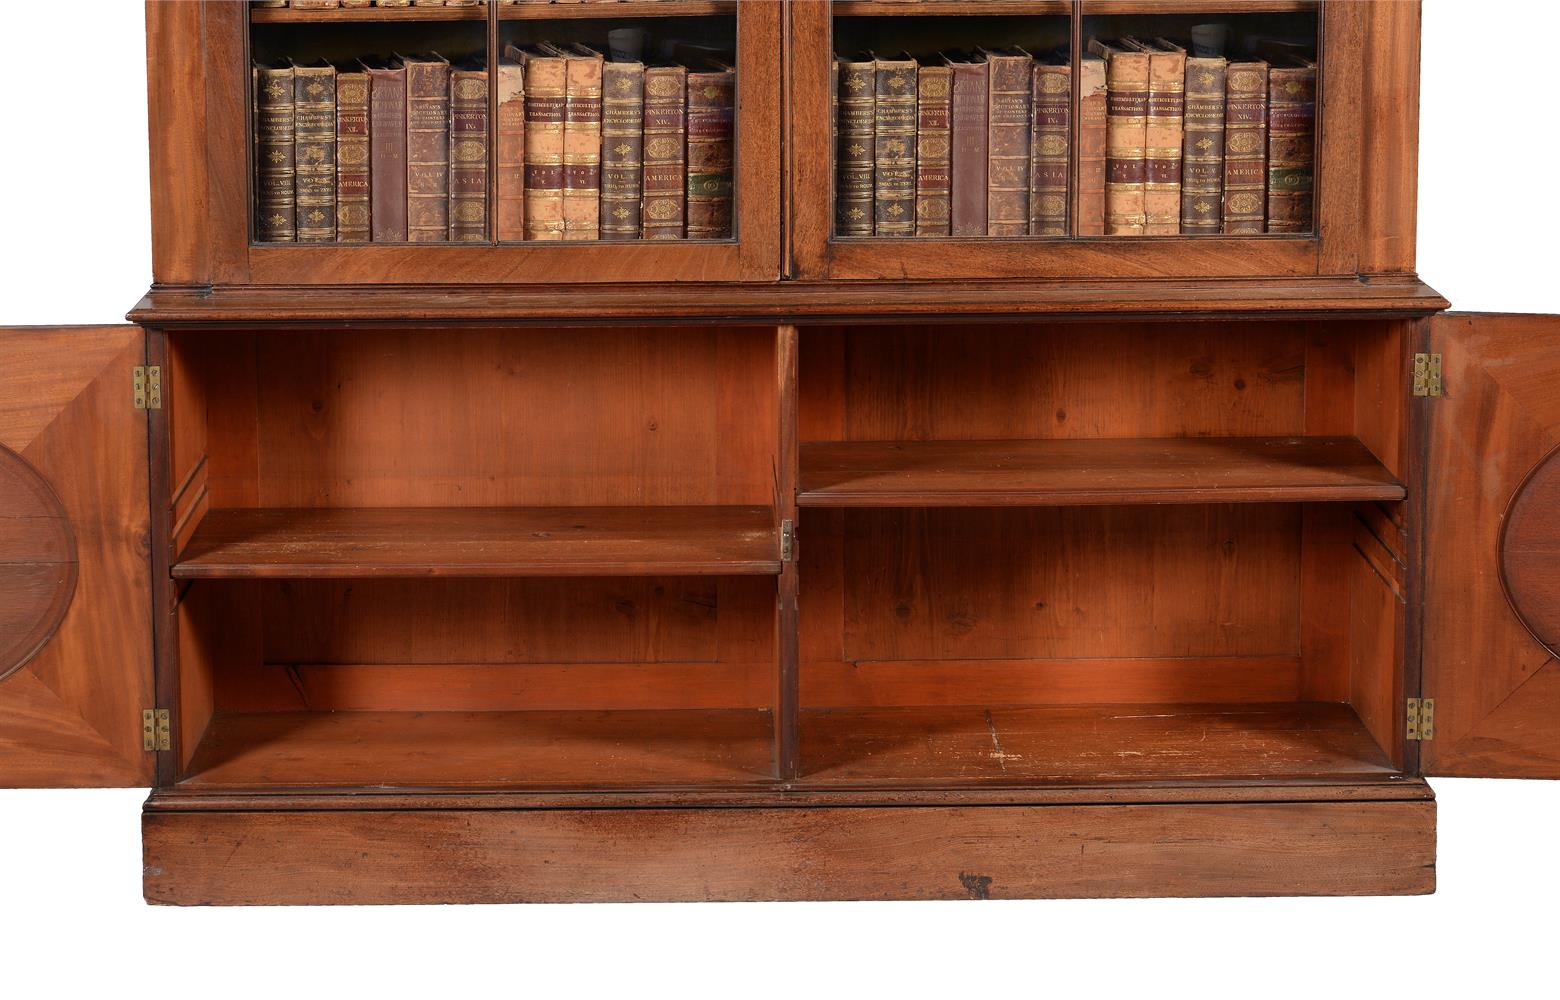 A GEORGE III MAHOGANY LIBRARY BOOKCASE, IN THE MANNER OF THOMAS CHIPPENDALE THE YOUNGER - Image 6 of 6